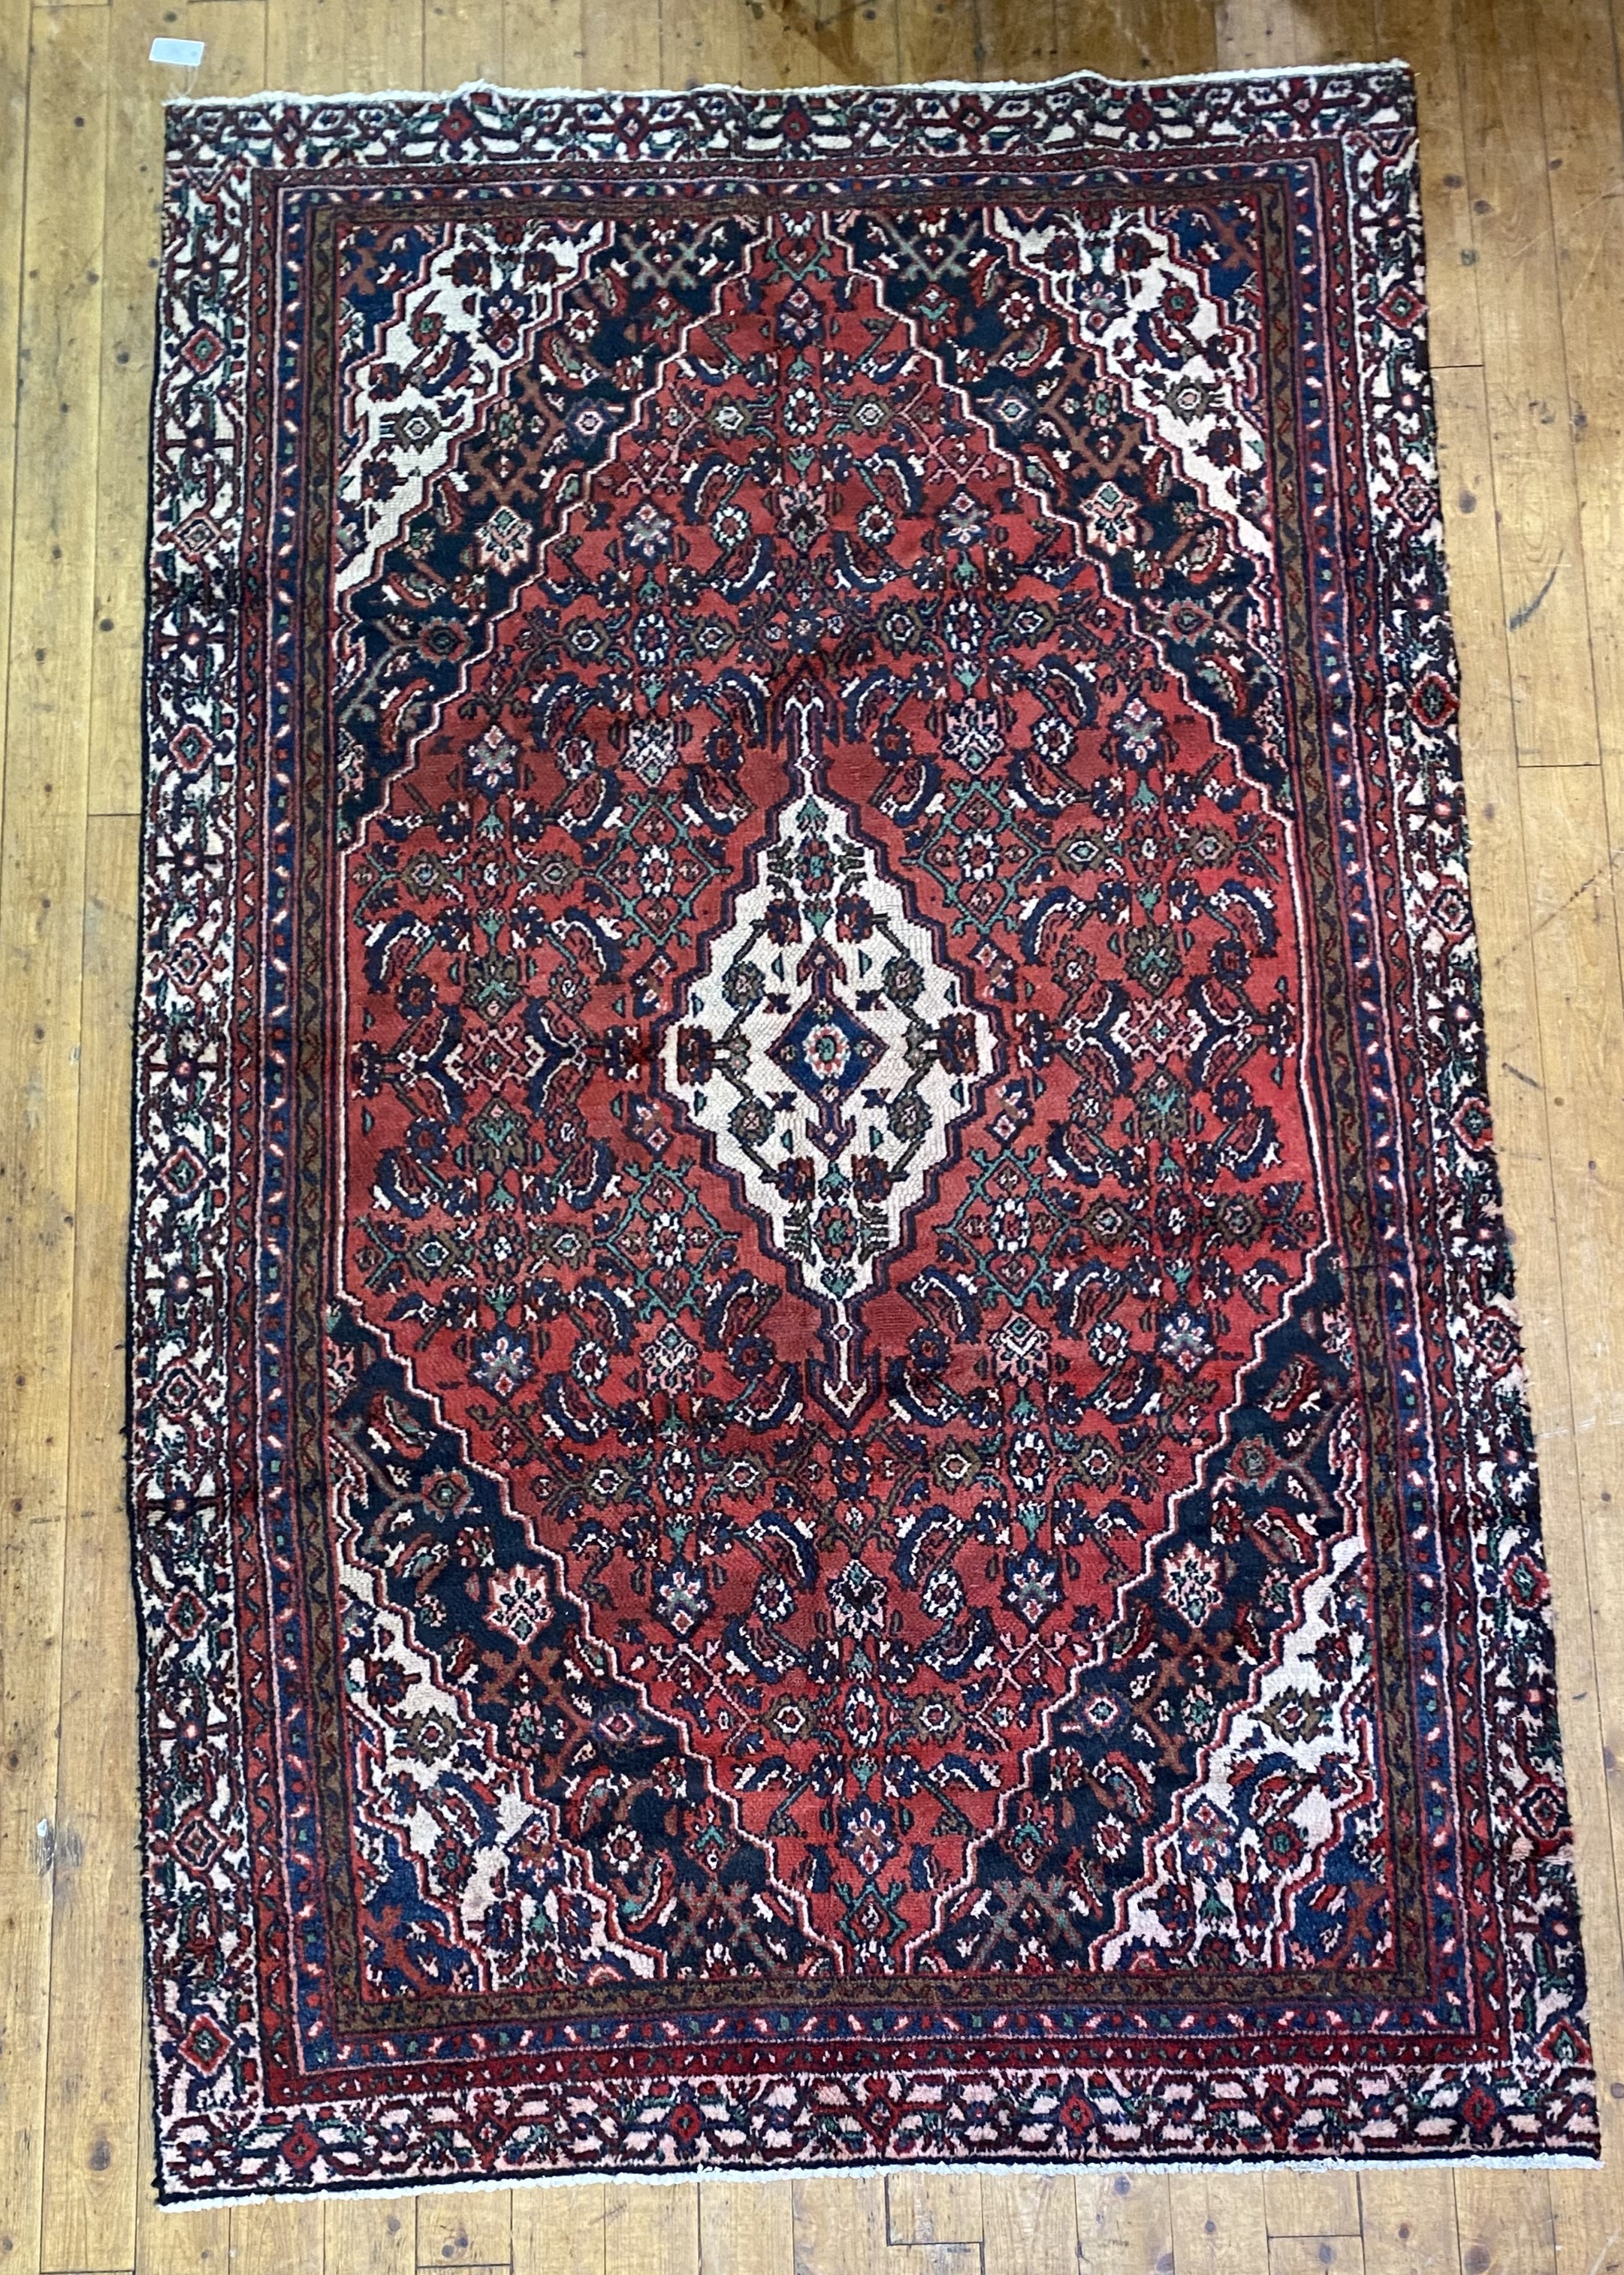 A hand knotted Persian rug, the busy red ground with ivory medallion and spandrels within a